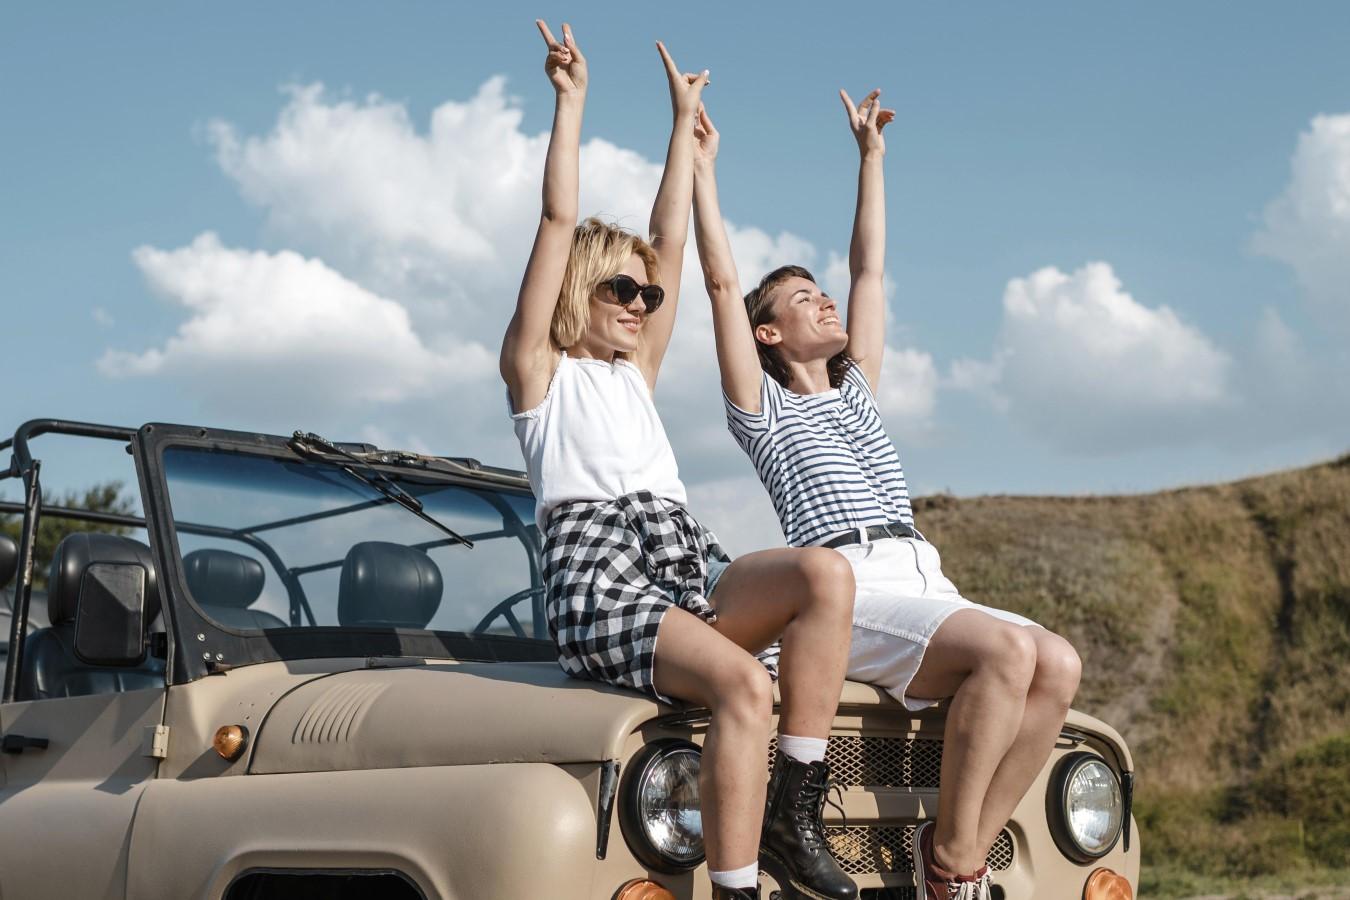 Two women sitting on a car

Description automatically generated with medium confidence